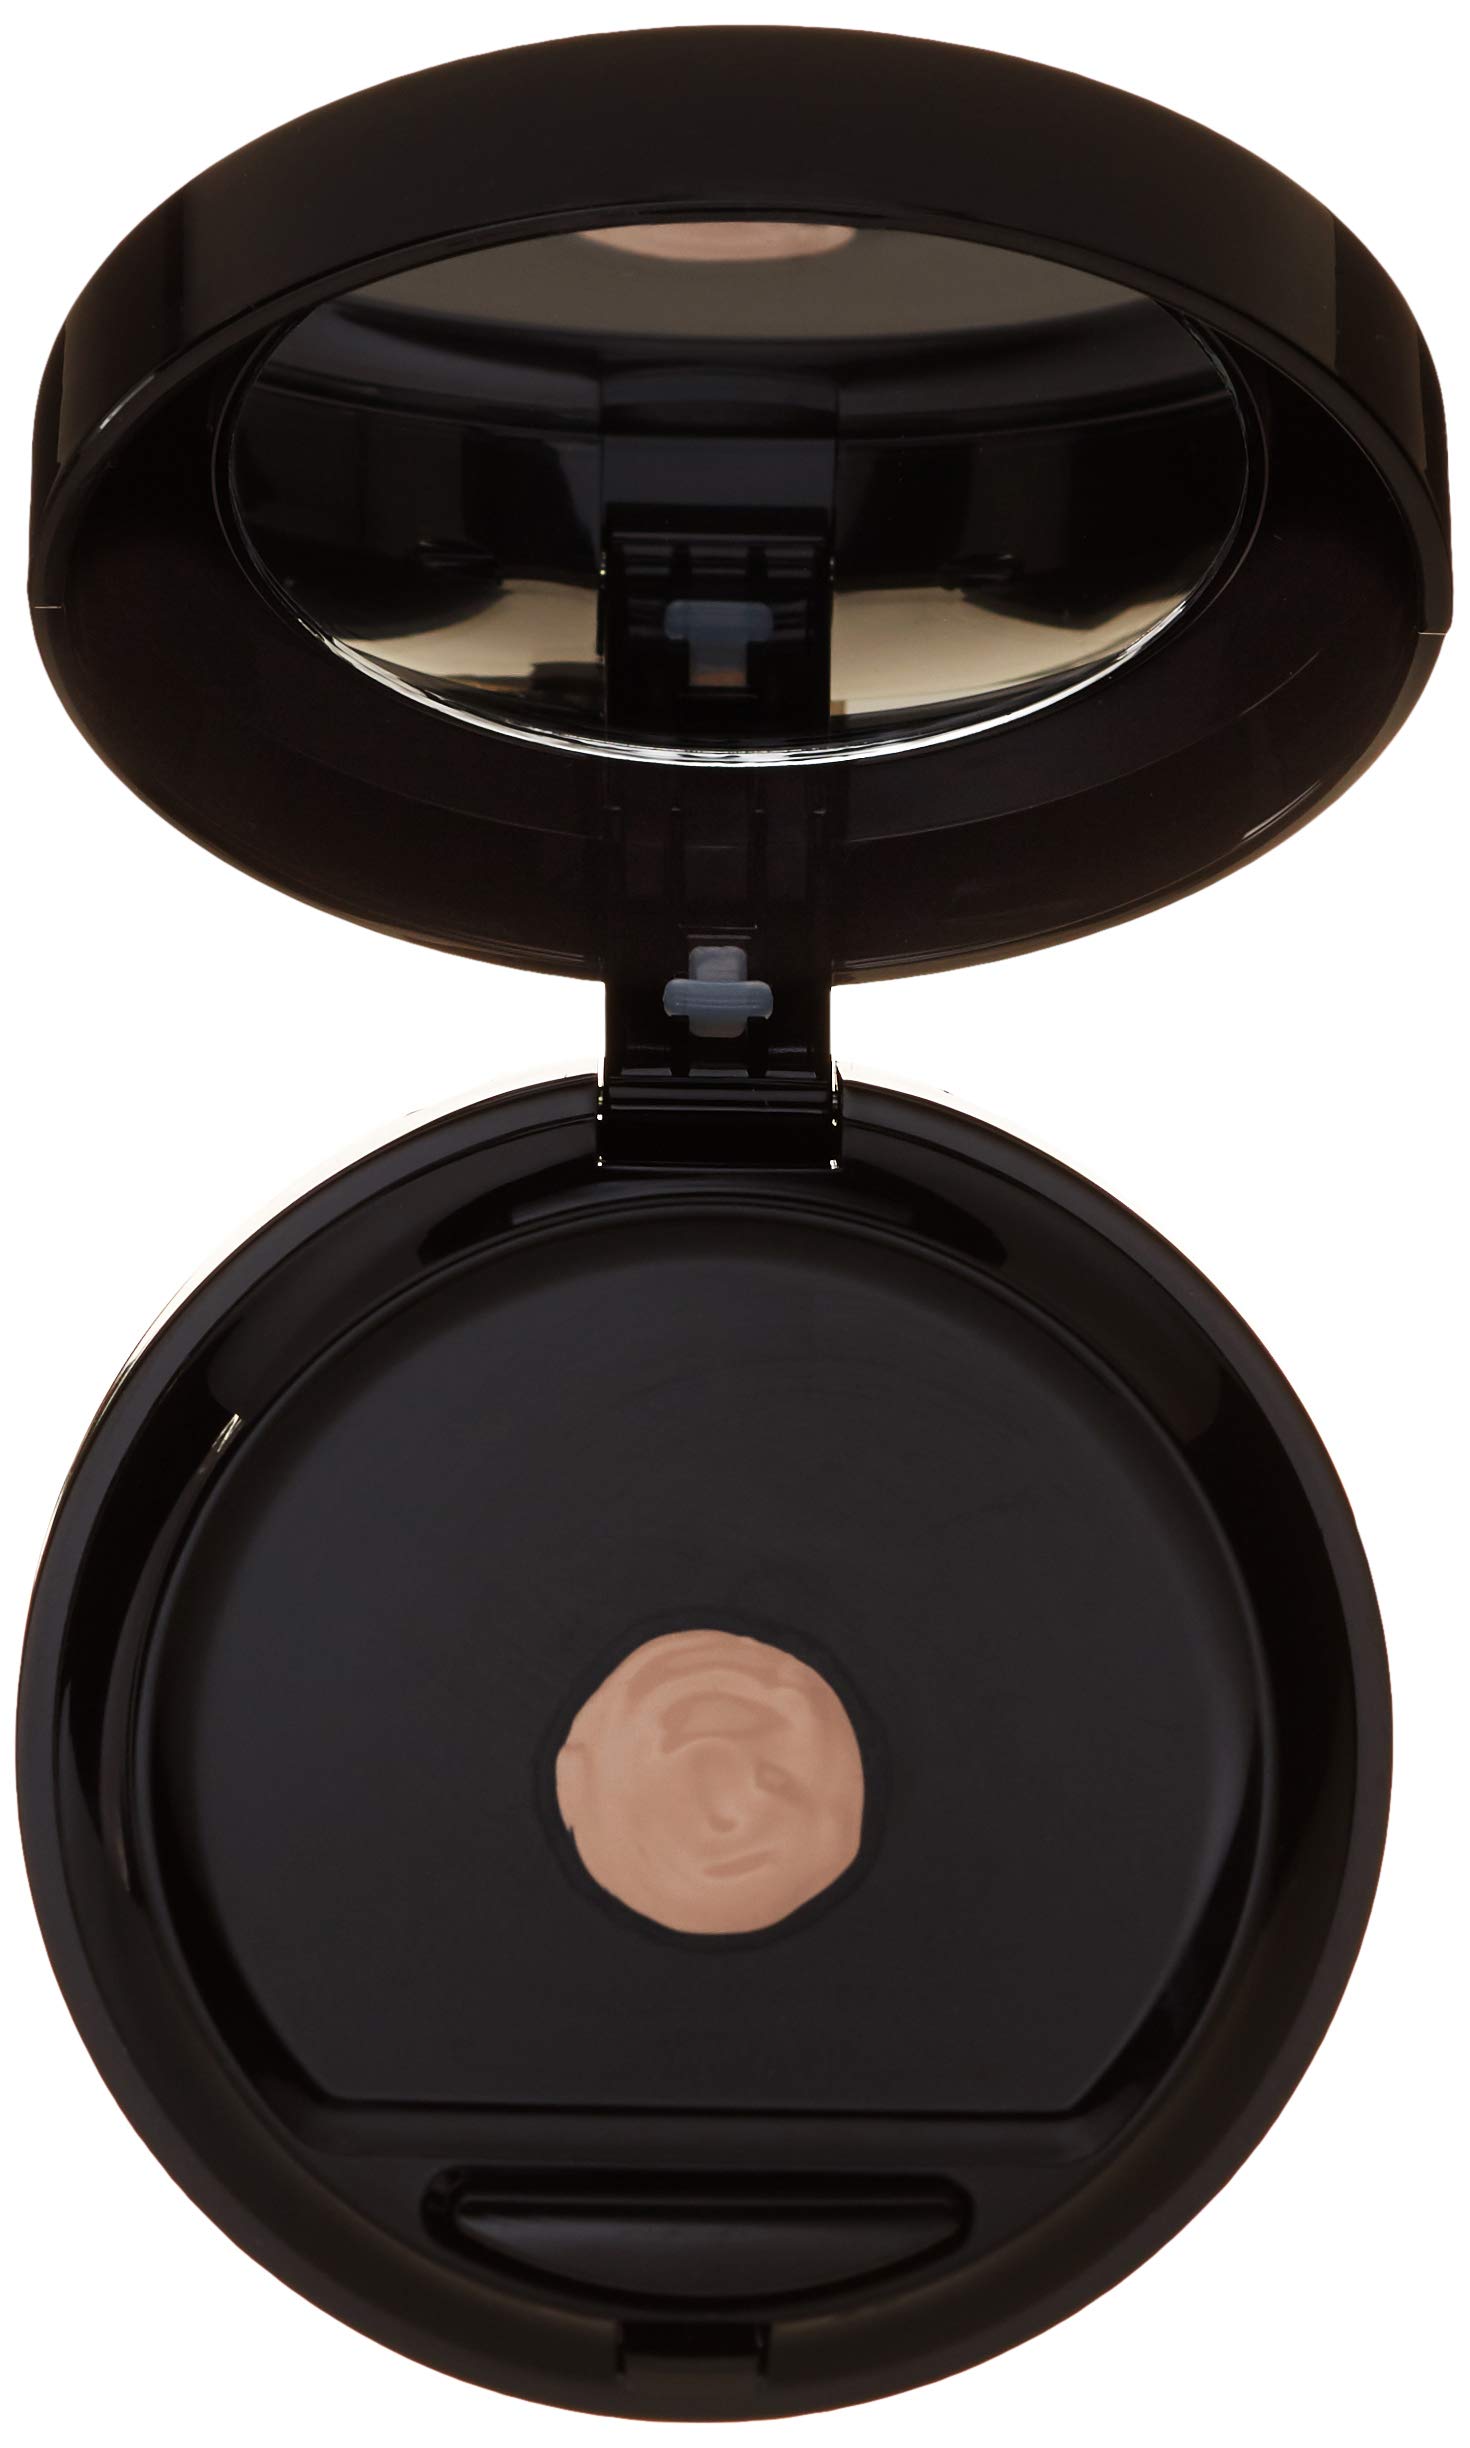 CAILYN BB Fluid Touch Compact, Porcelain